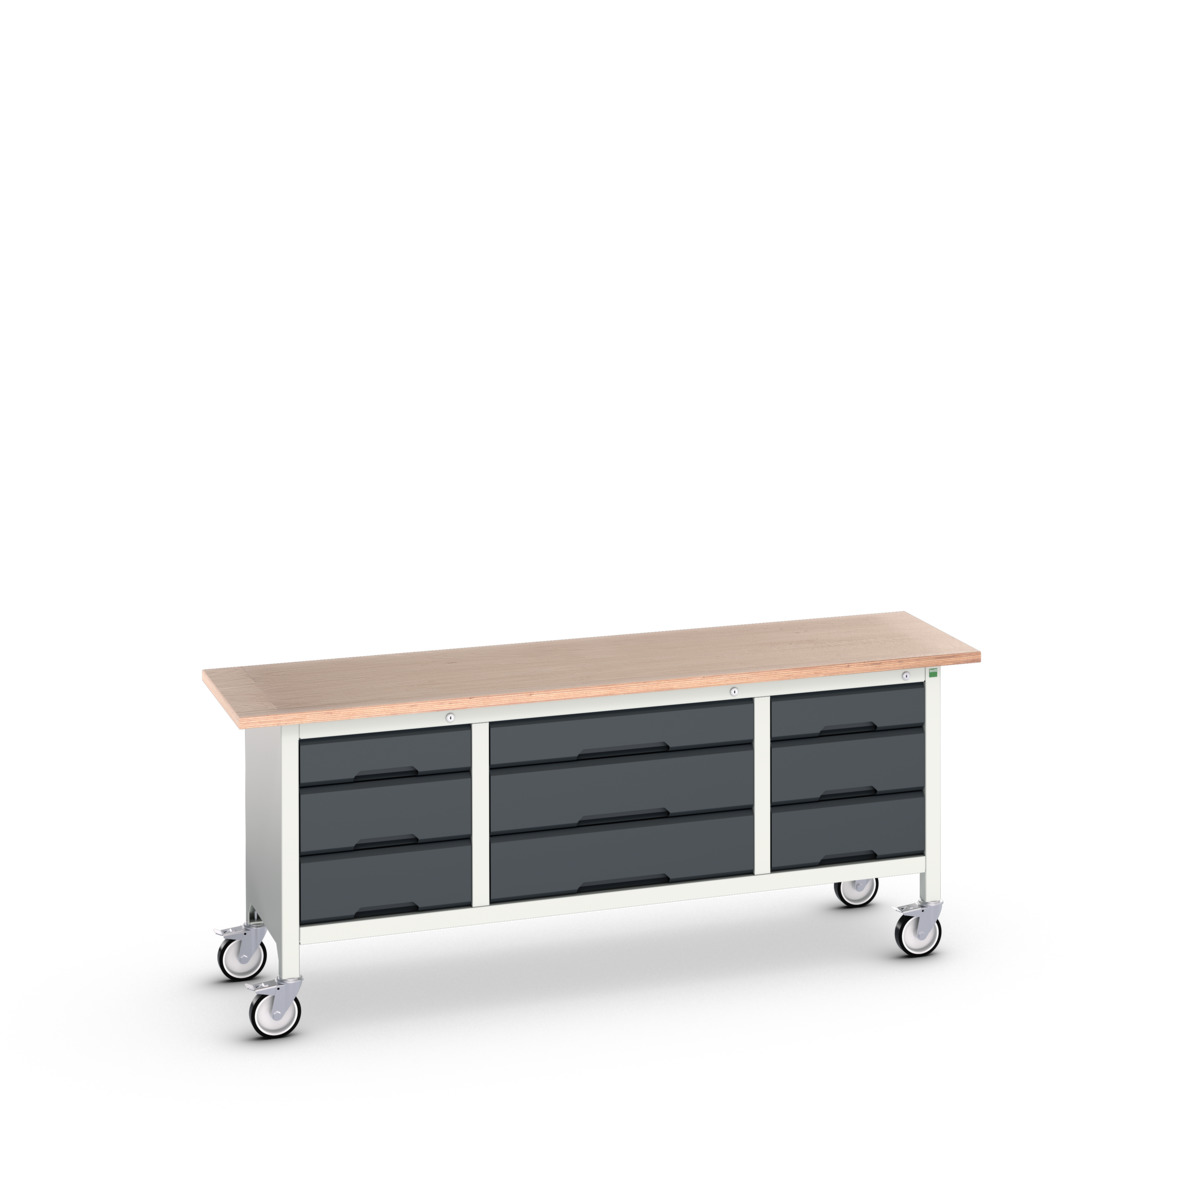 16923233.19 - verso mobile storage bench (mpx)